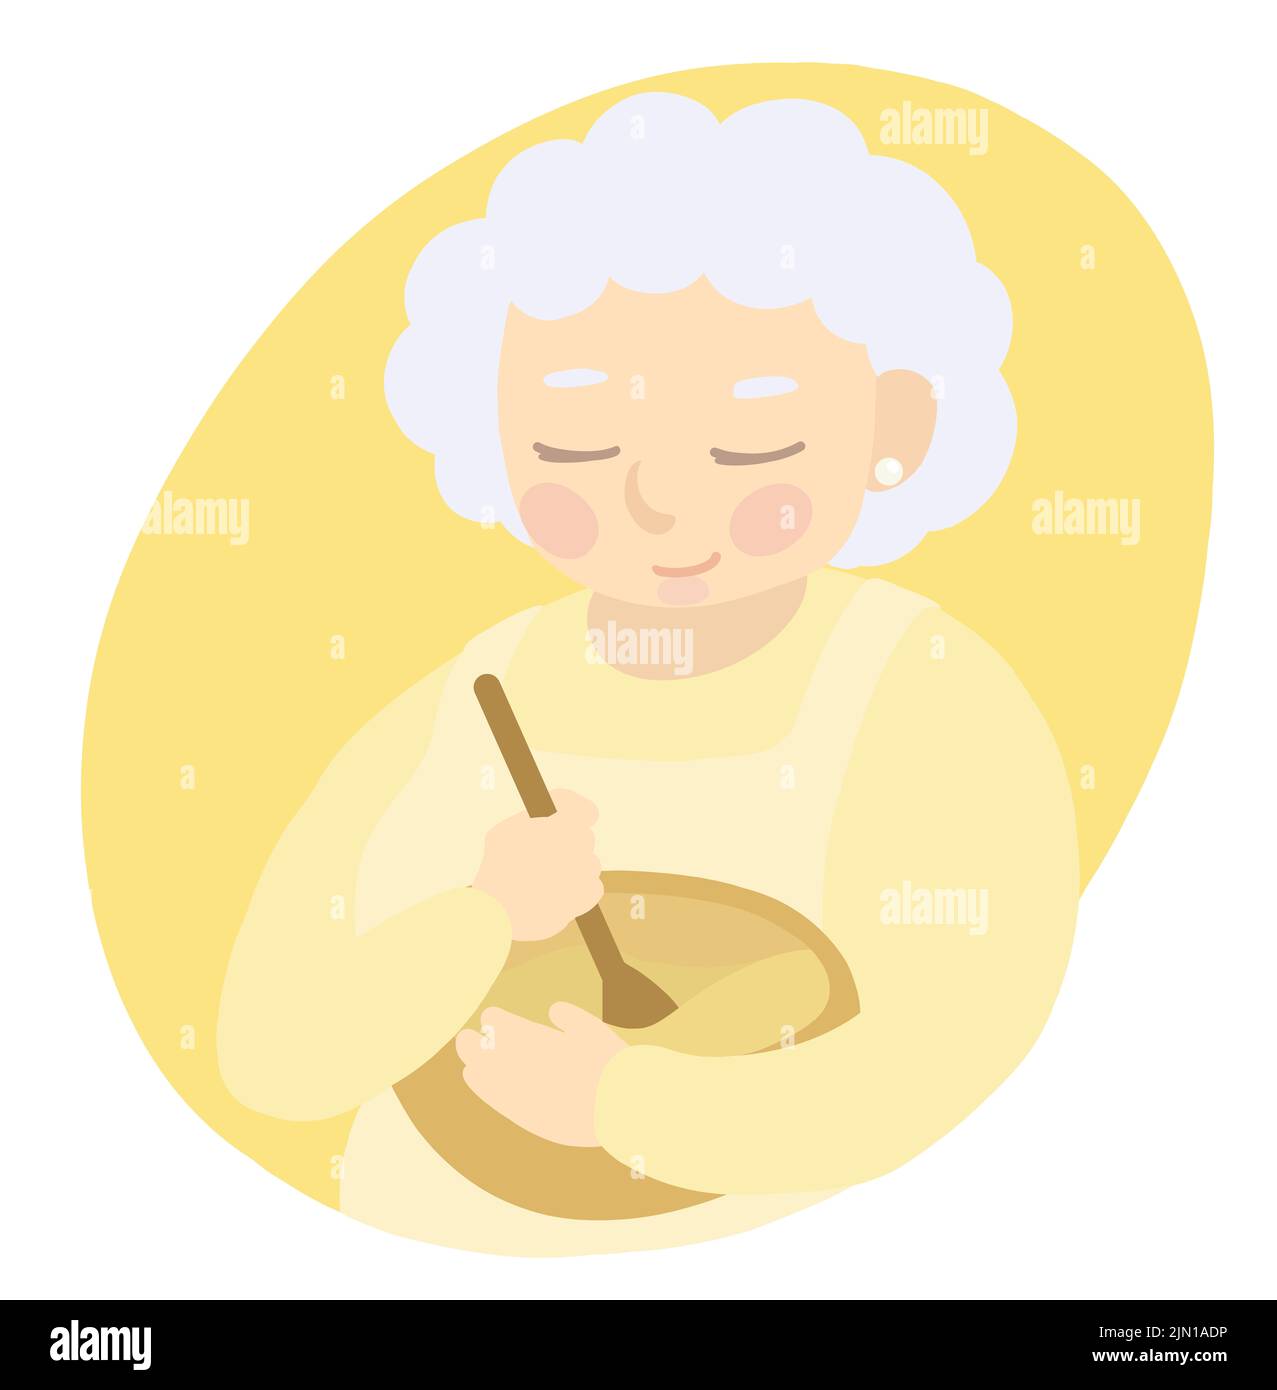 Illustration of a granny baking, mixing batter in a bowl. Stock Photo